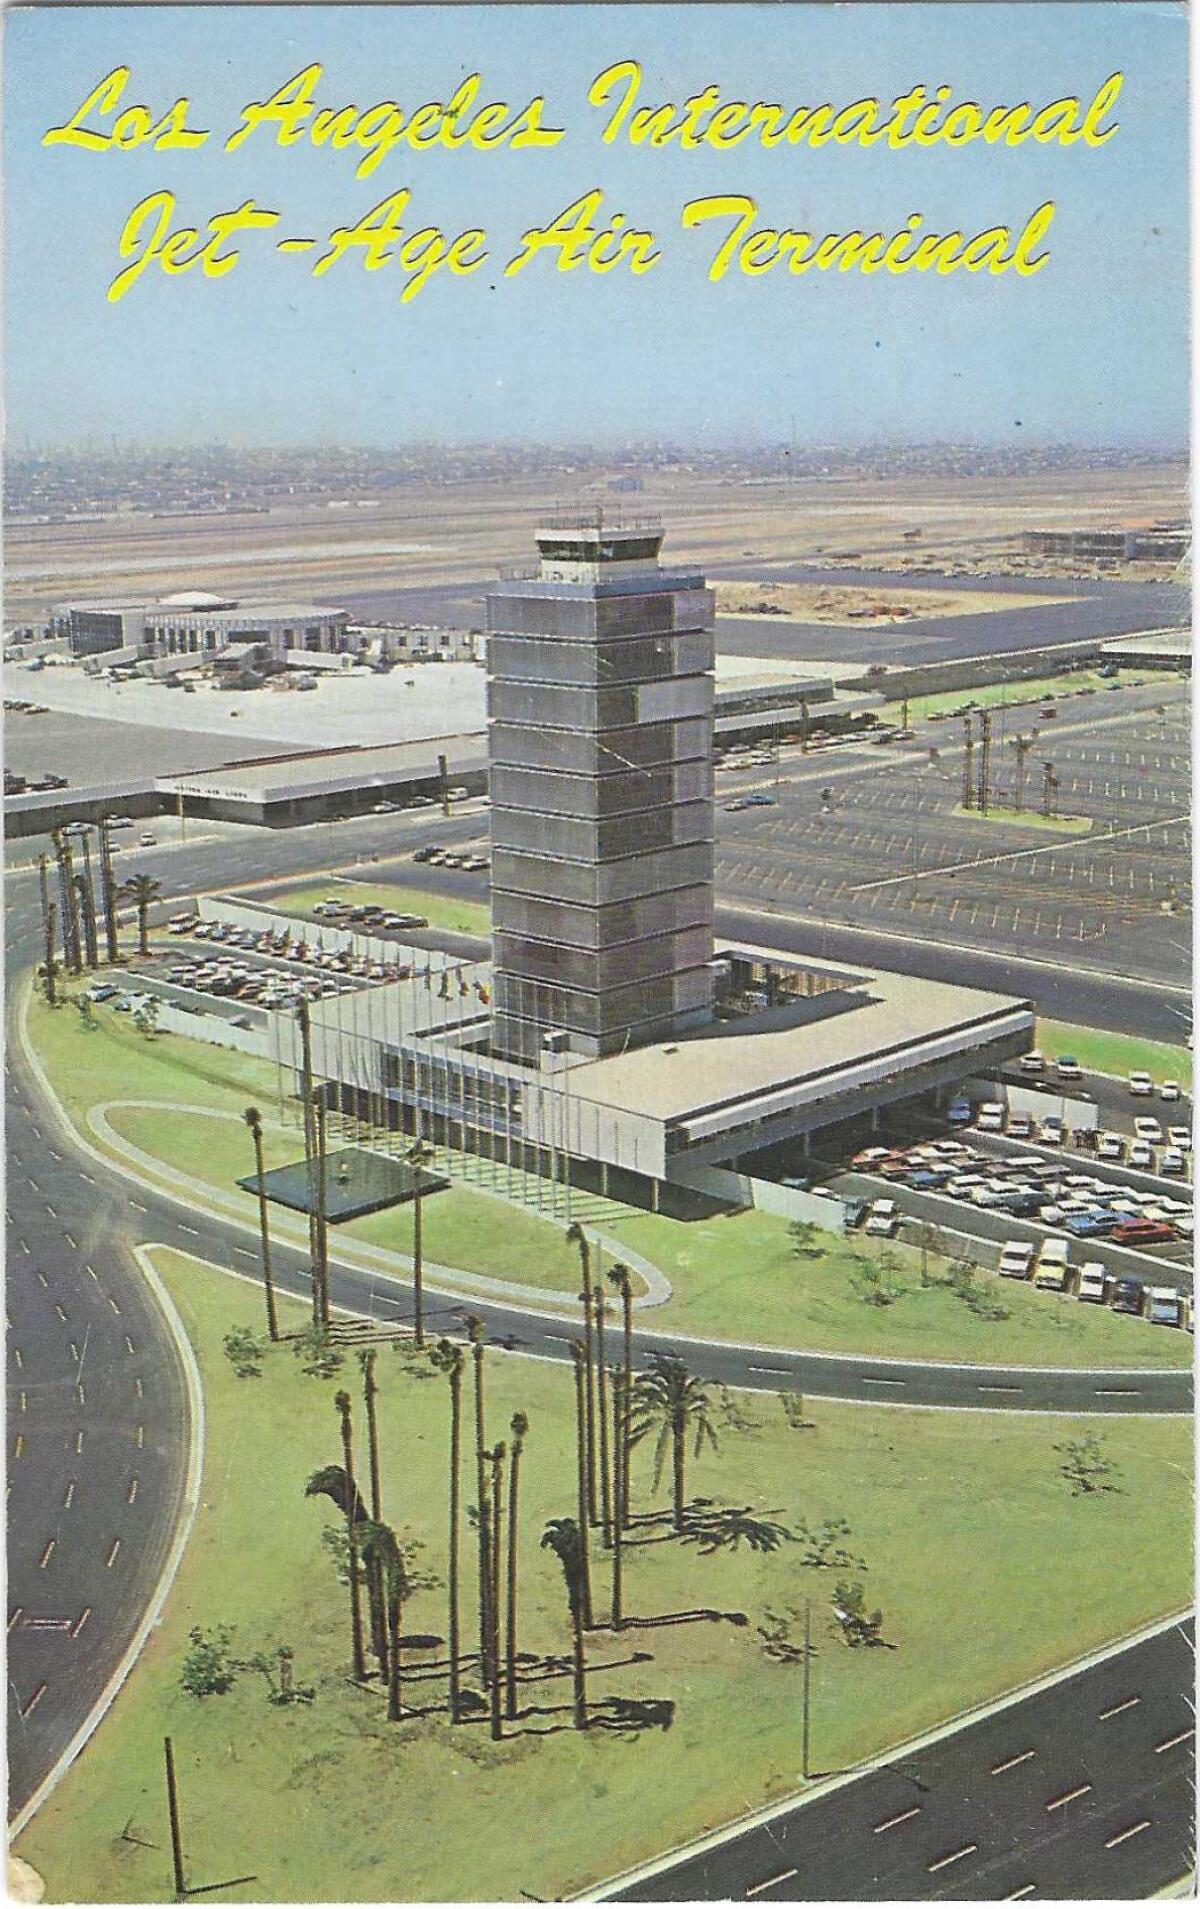 Overhead view of 1963 LAX. Text reads: "Los Angeles International Jet-Age Air Terminal"